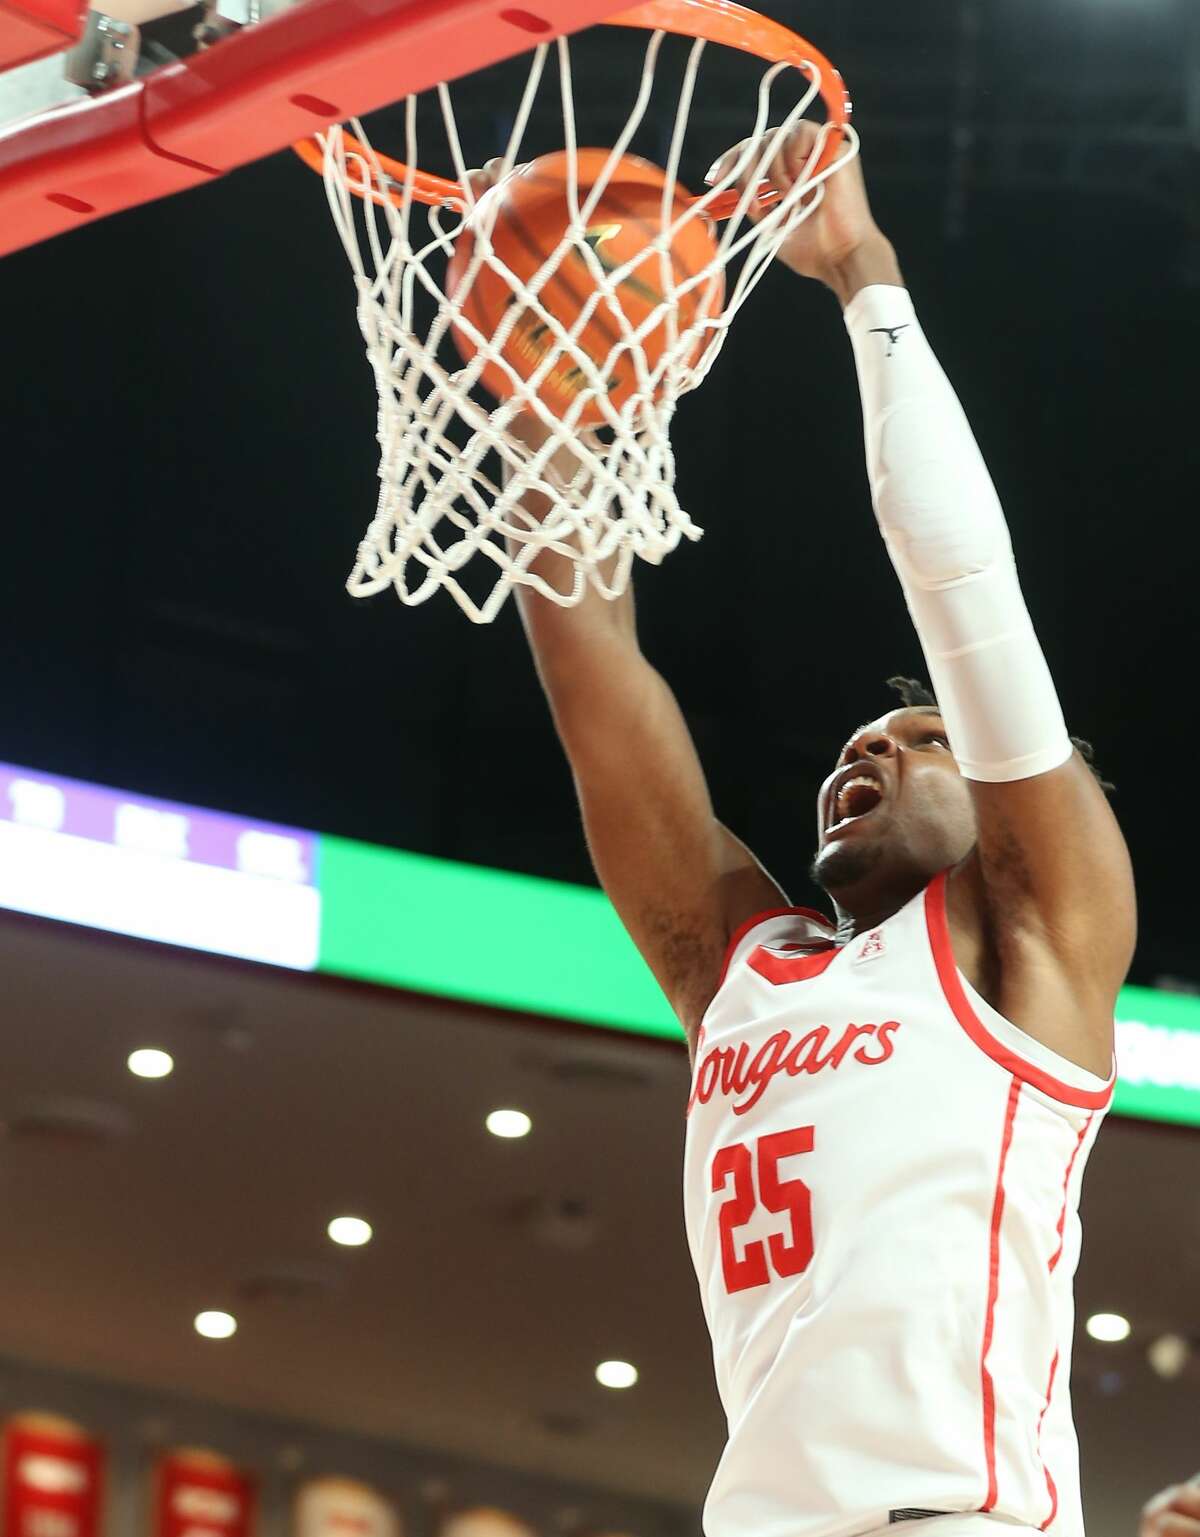 Houston Cougars center Josh Carlton (25) dunks the ball in the first half of game action against the East Carolina Pirates at the Fertitta Center in Houston on Saturday, Jan. 22, 2022.